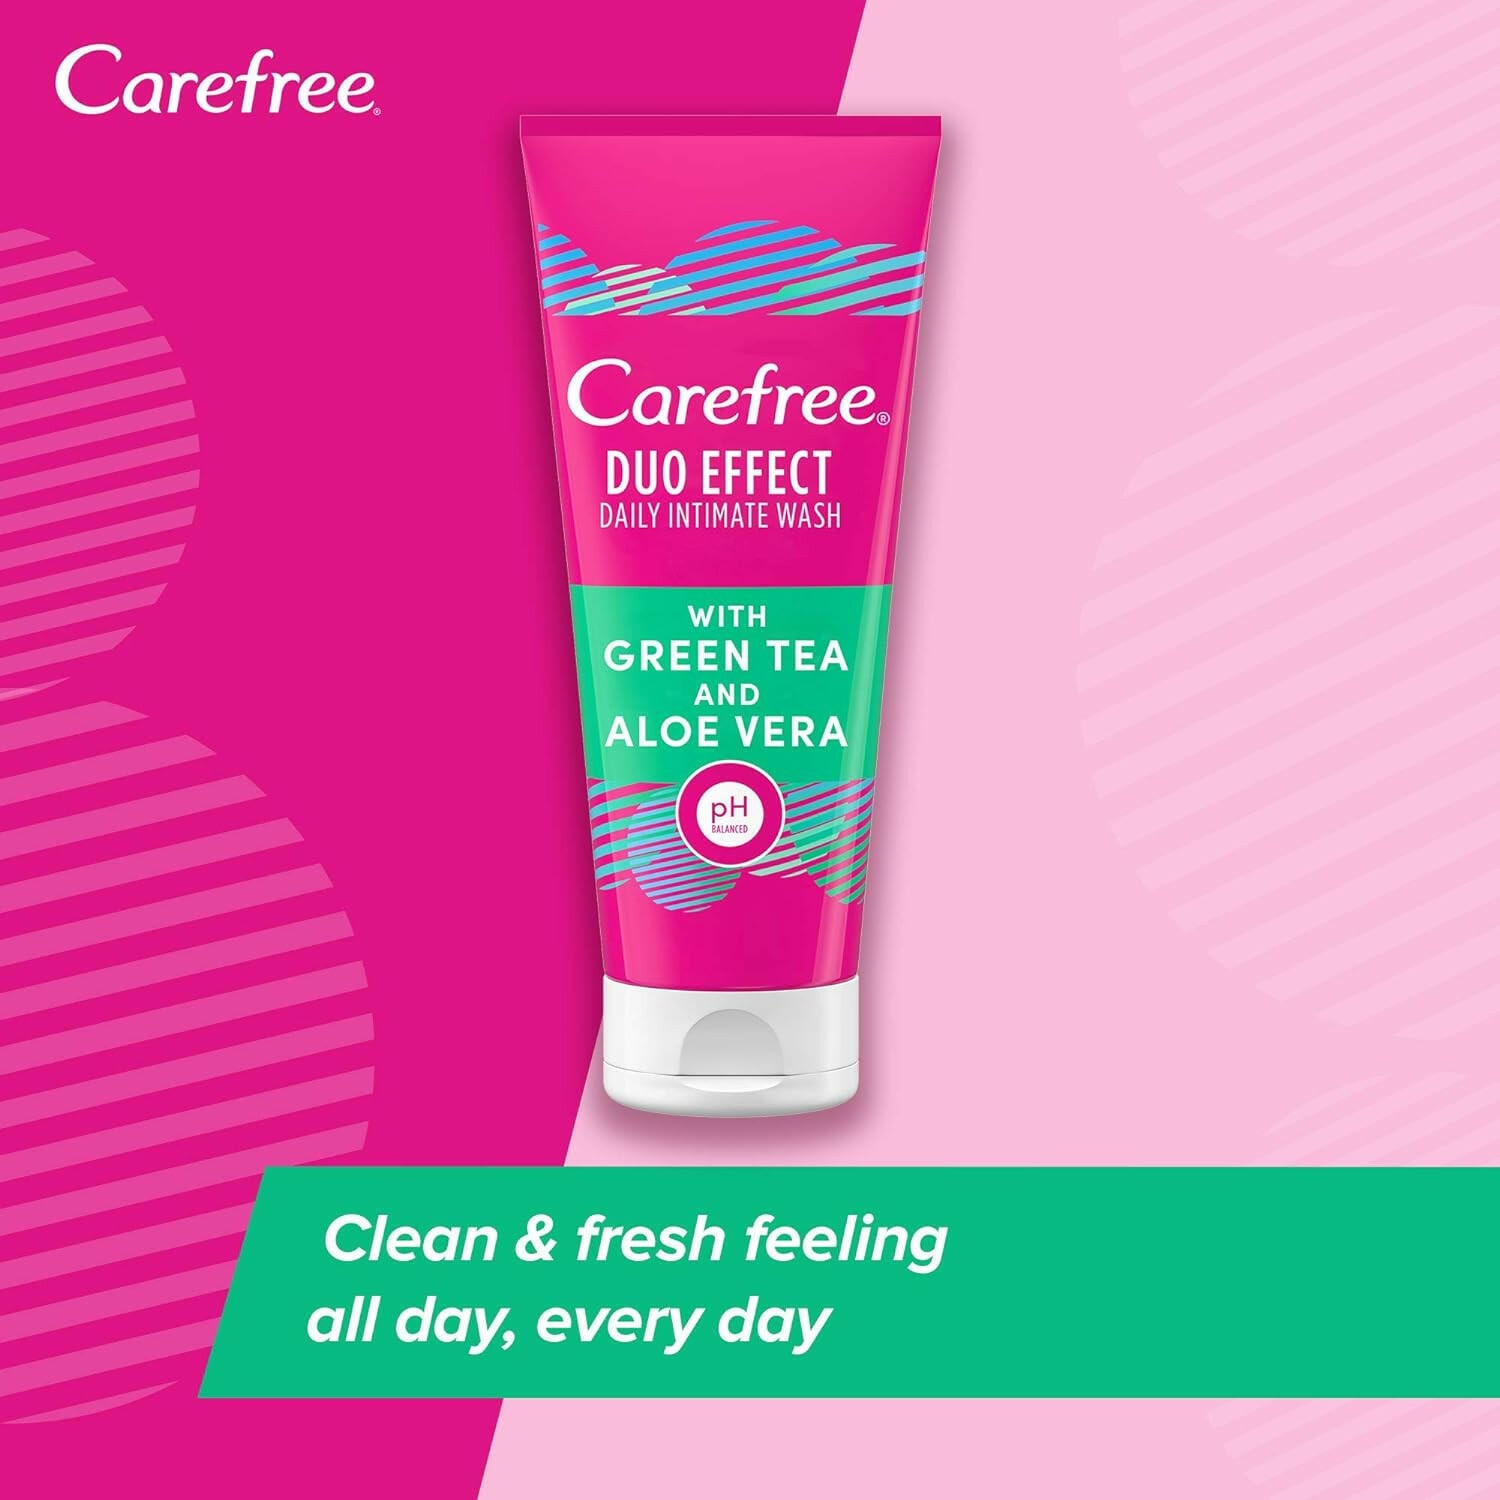 Carefree Duo Effect Daily Intimate Wash with Green Tea and Aloe Vera, 200ml